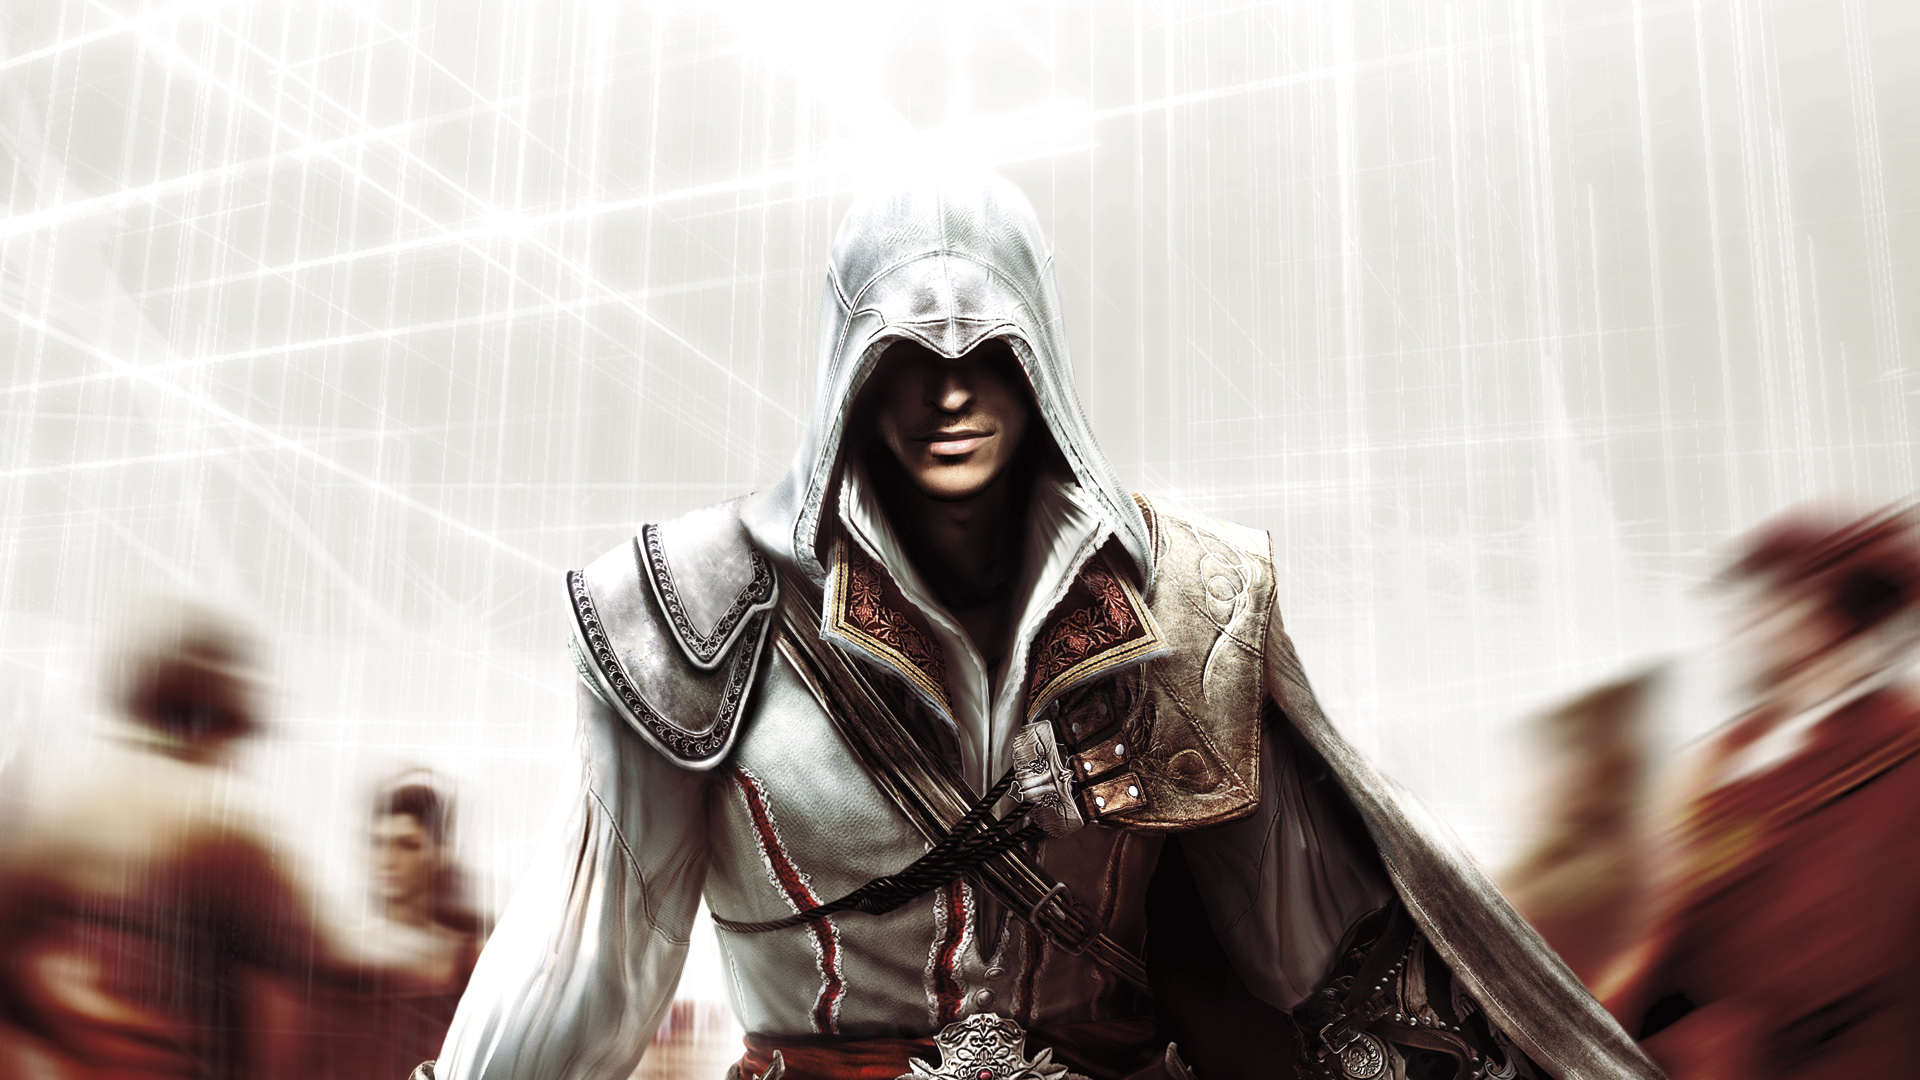 Download Assassin's Creed II for Free Now 